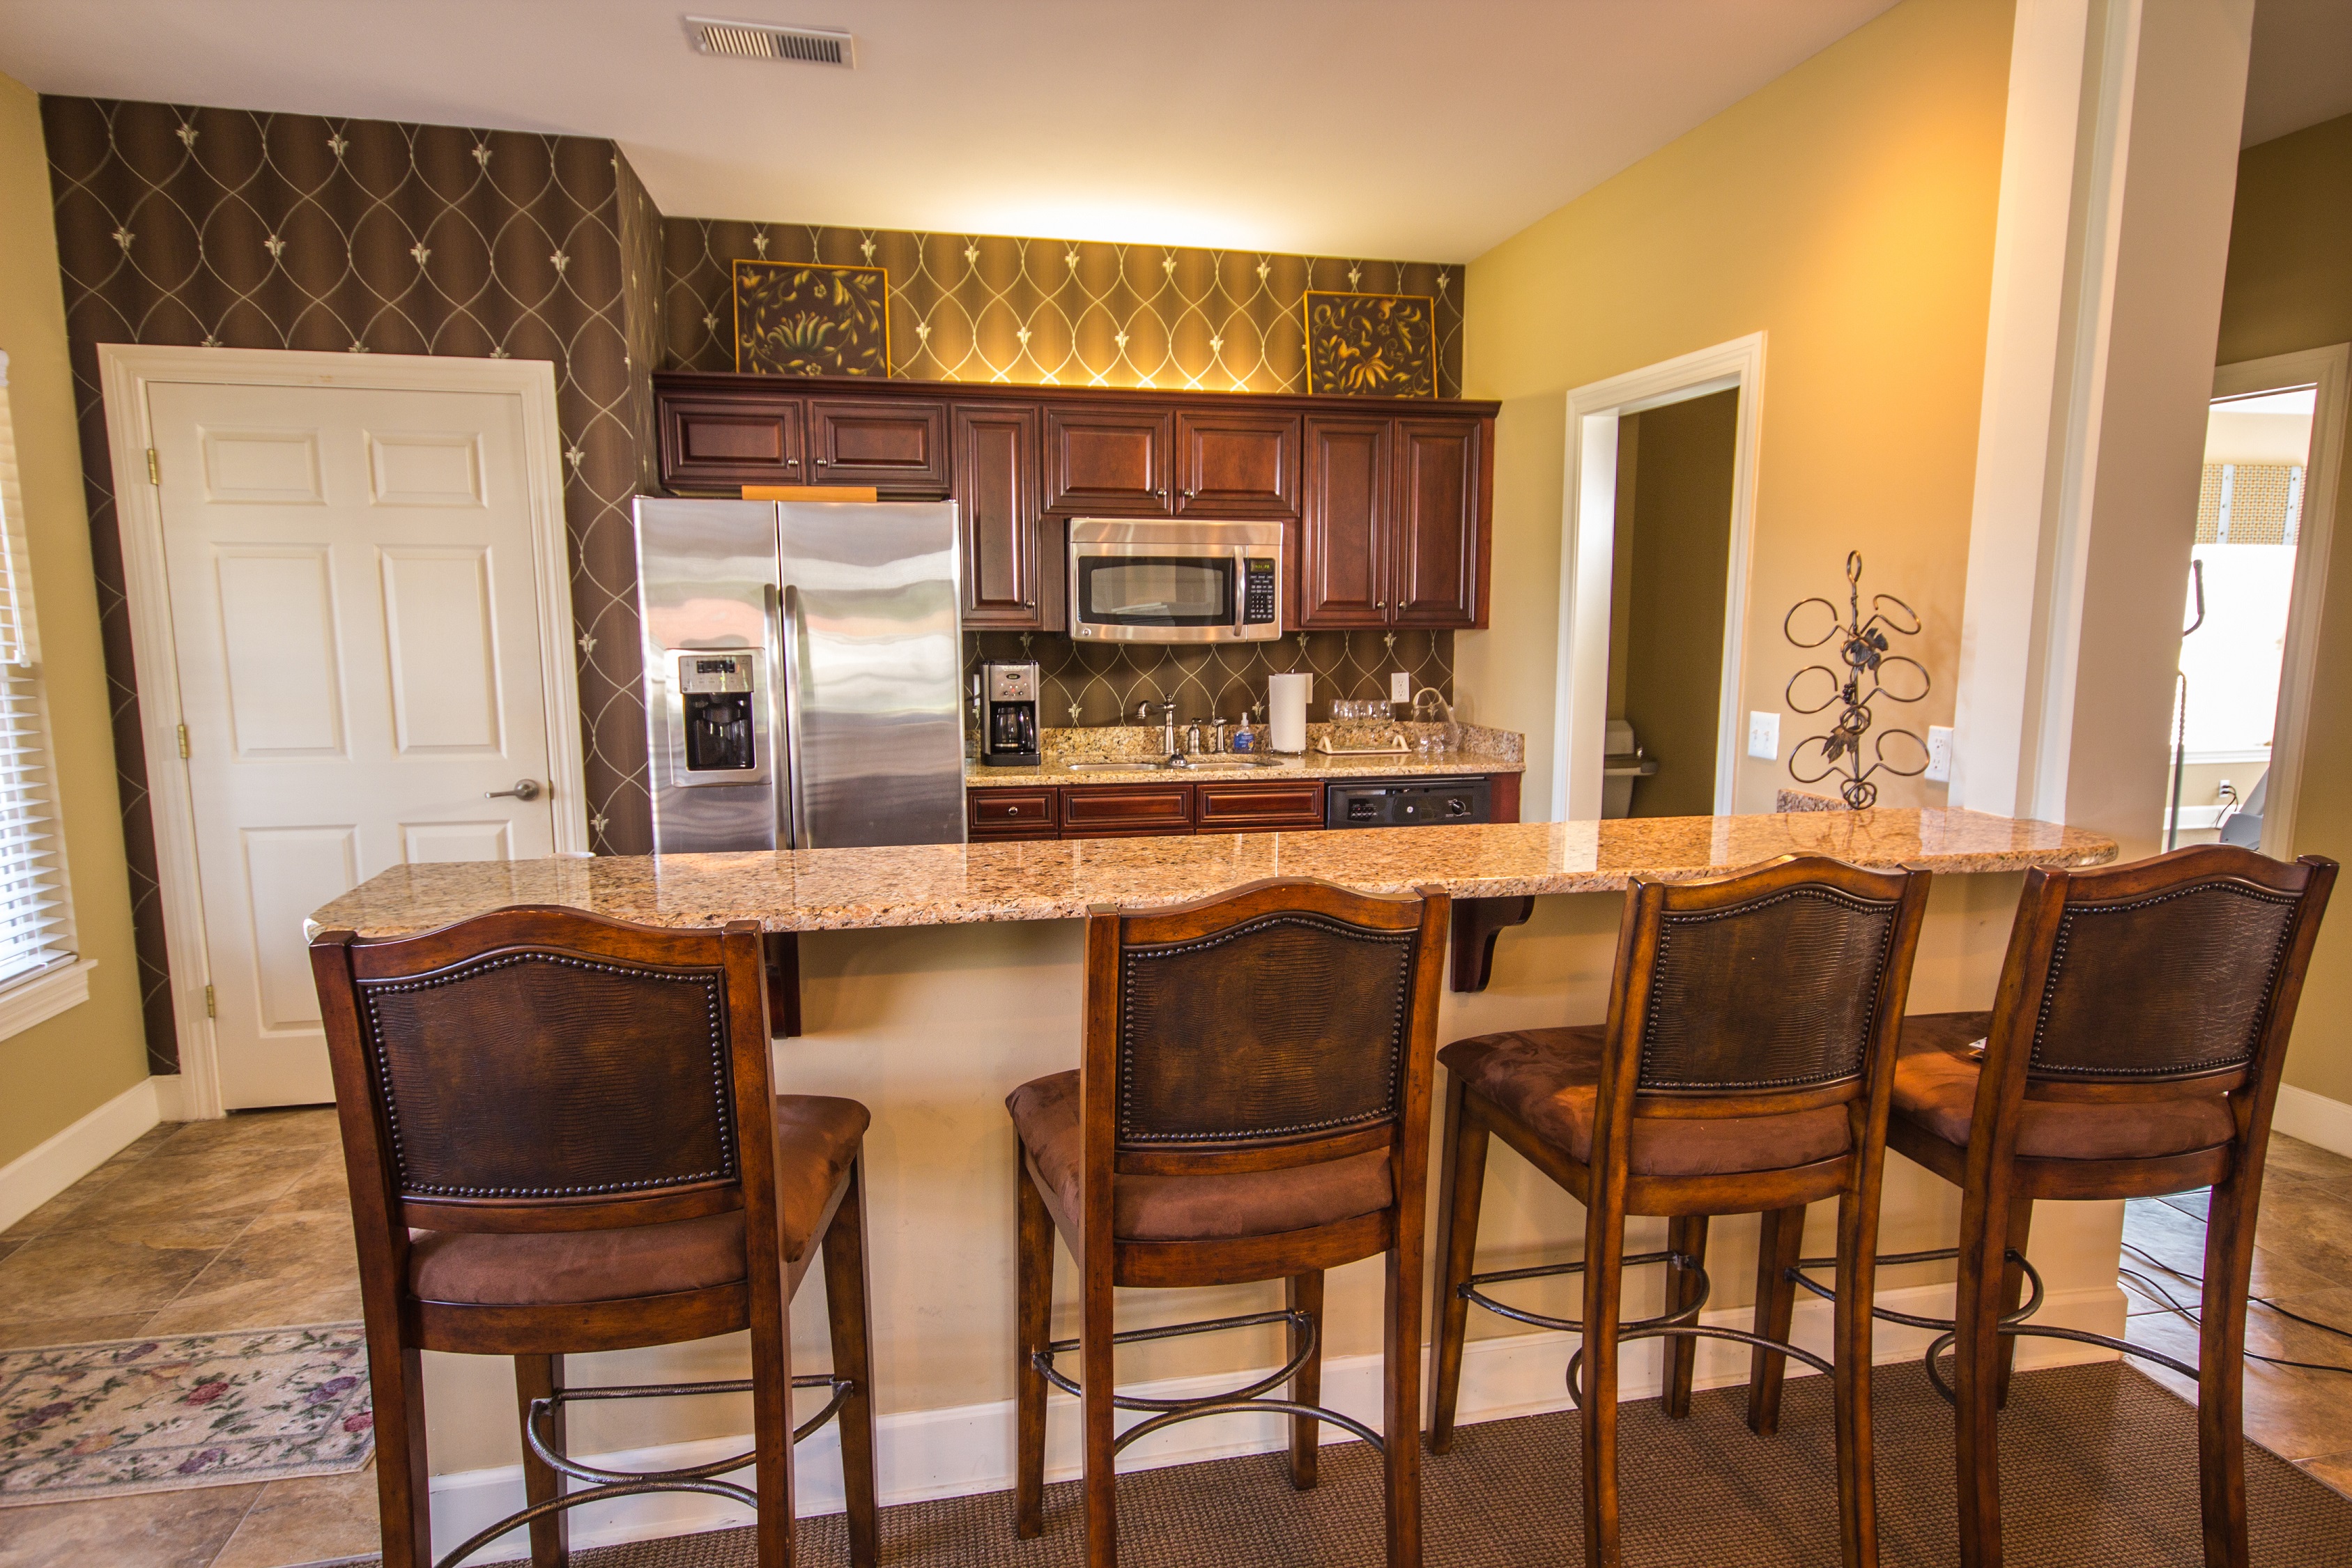 A full kitchen in the clubhouse is a big convenience when hosting events and parties